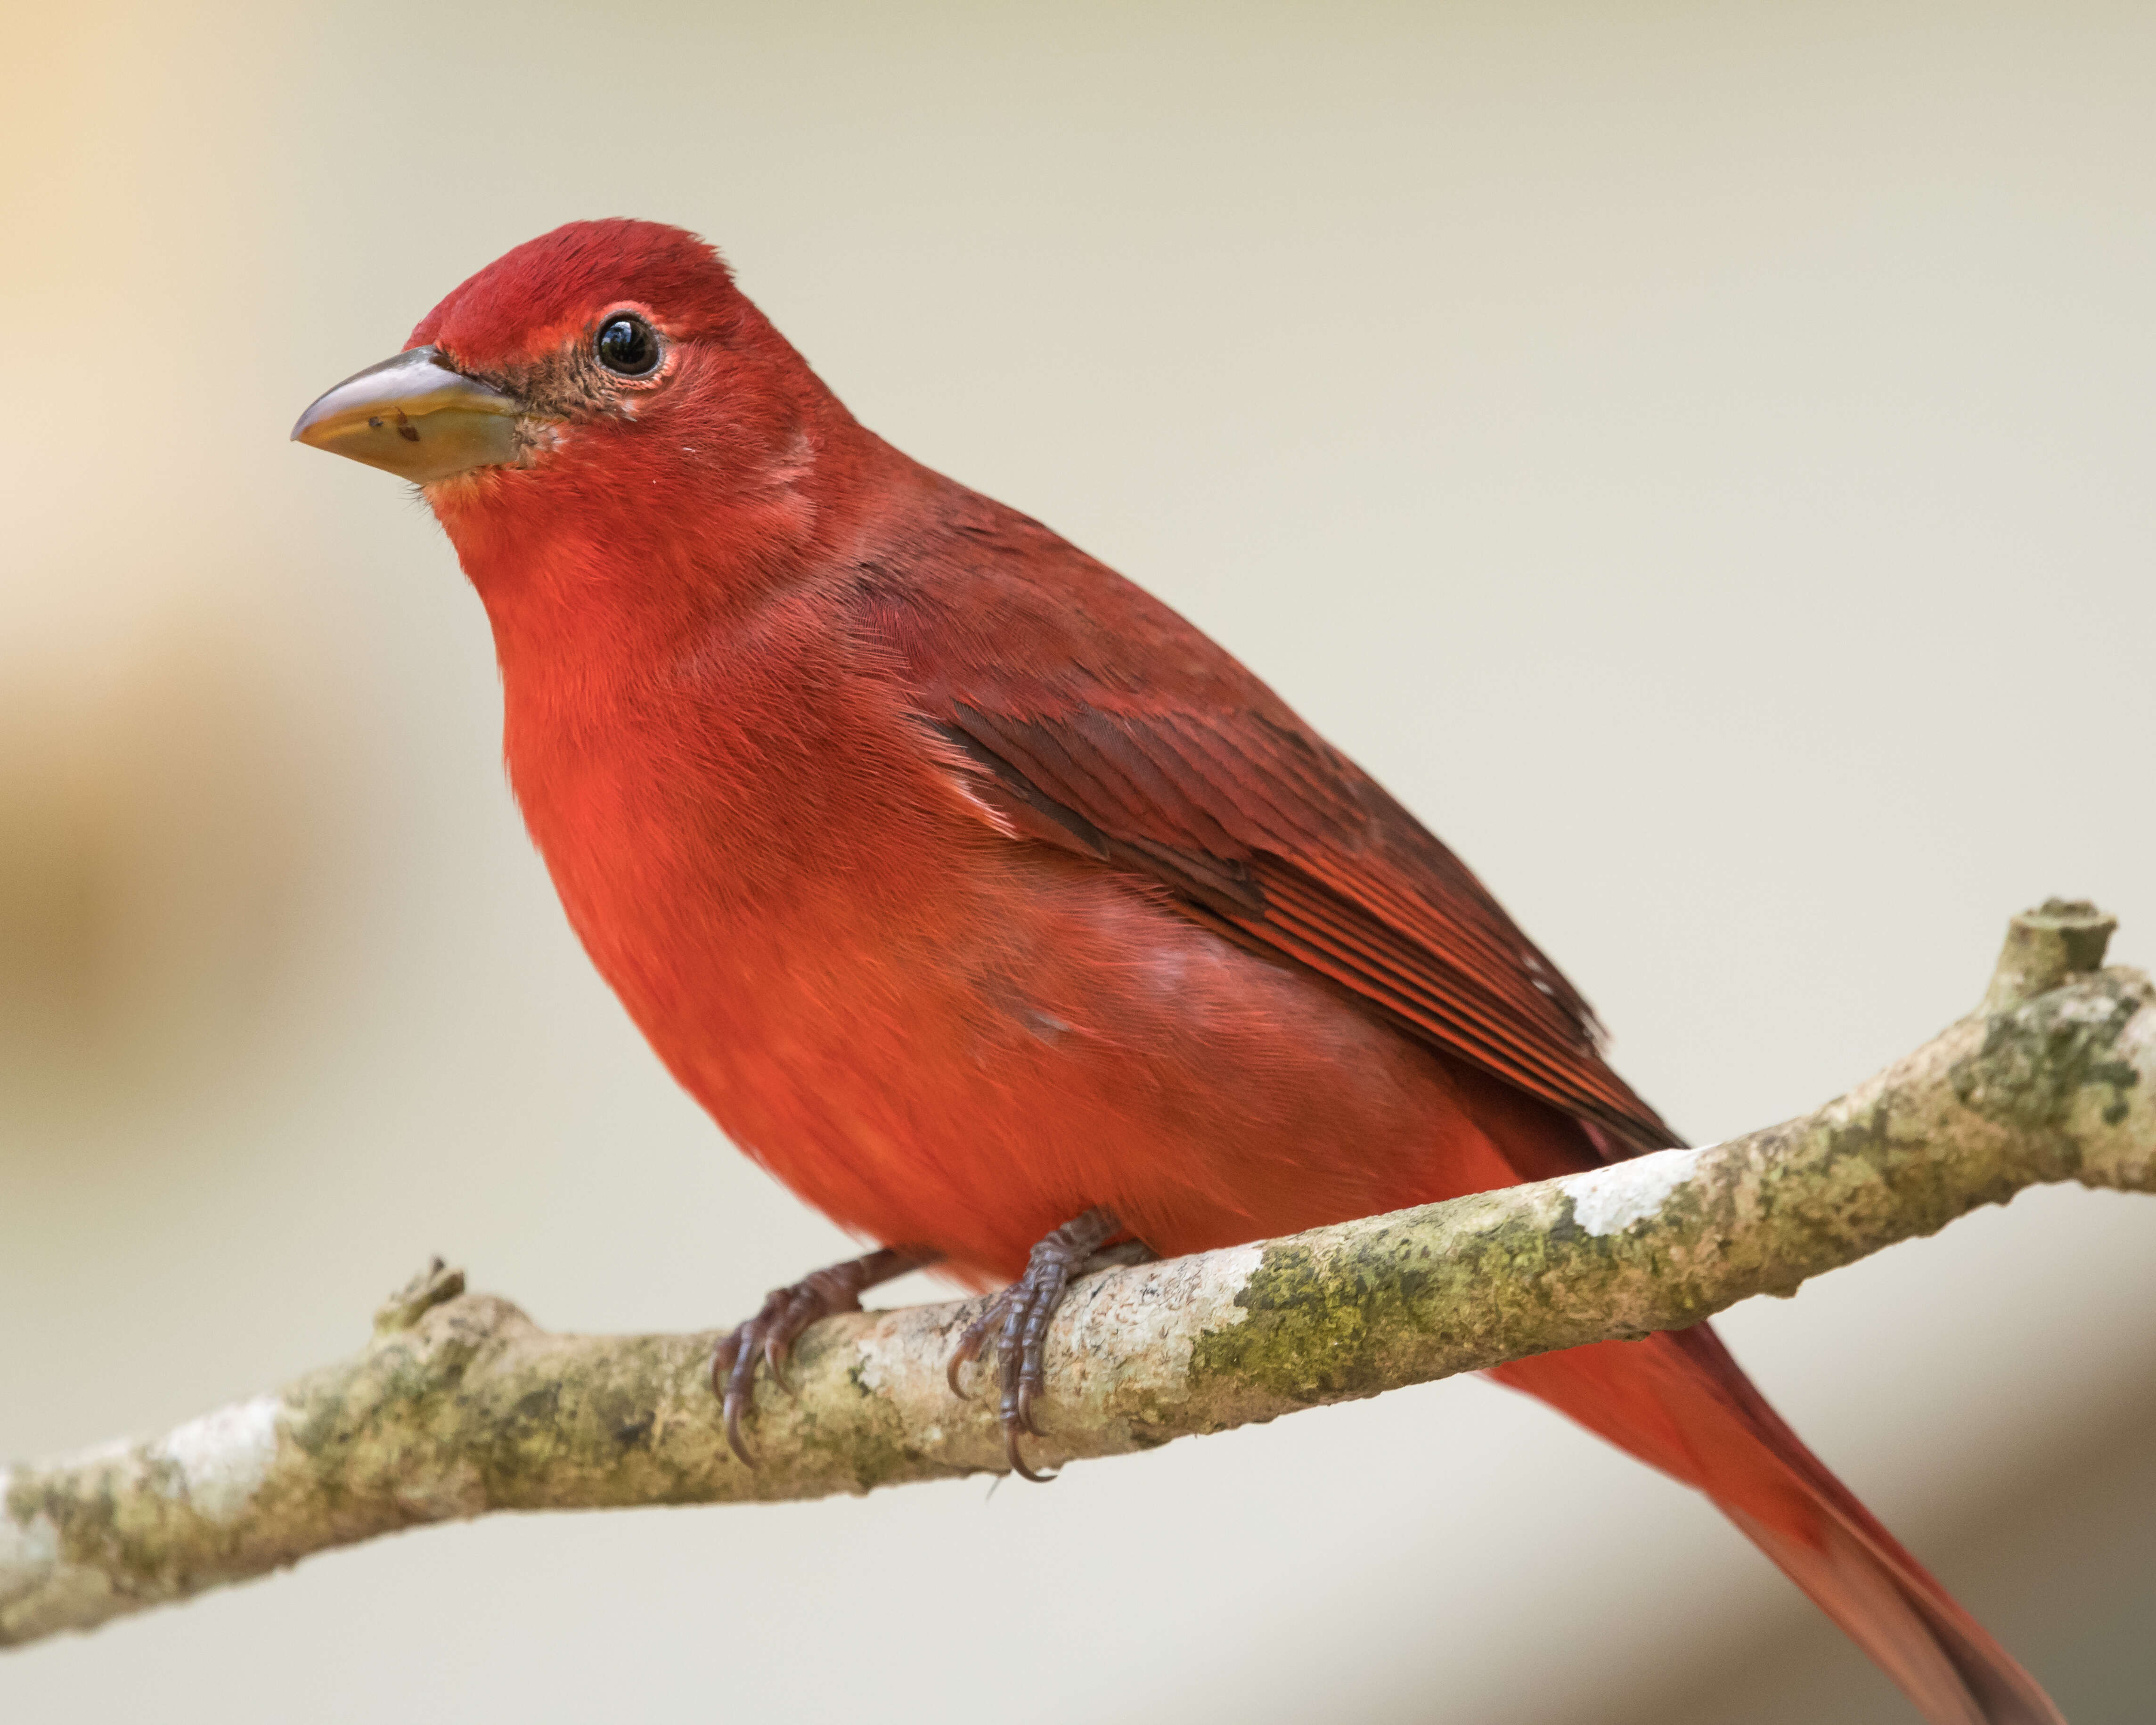 Image of Summer Tanager